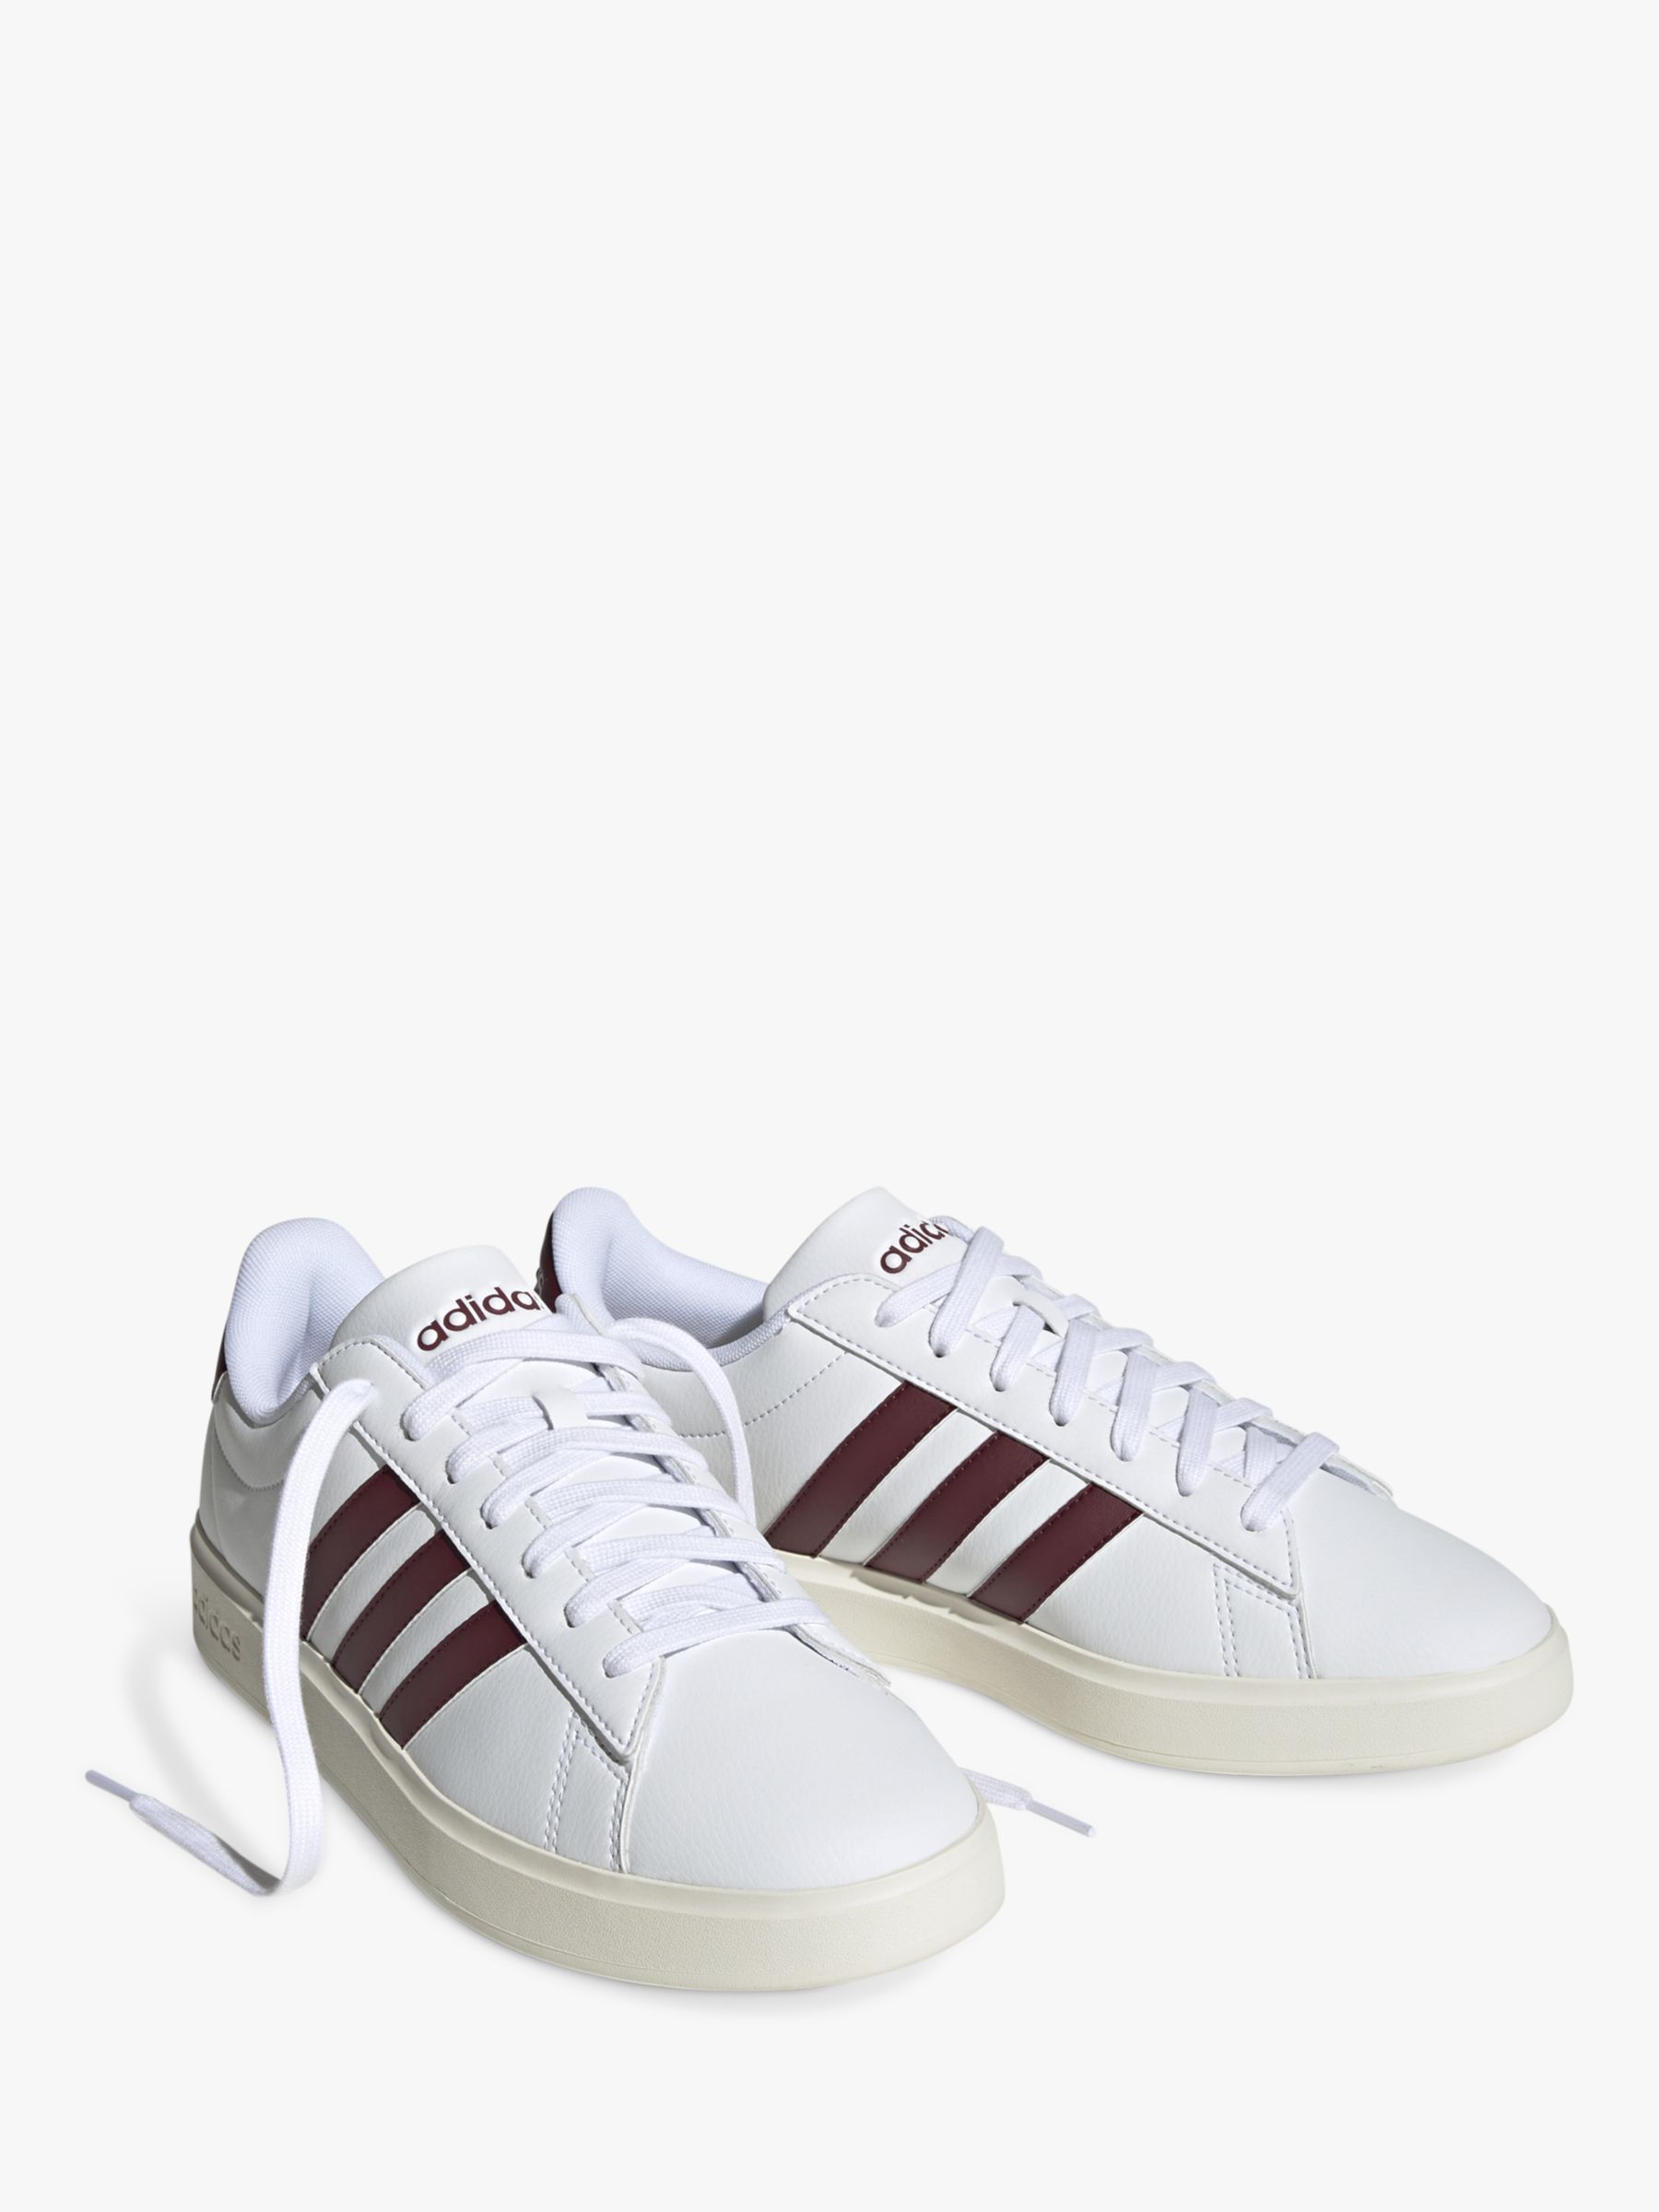 adidas Grand Court 2.0 Trainers, at Lewis & Partners